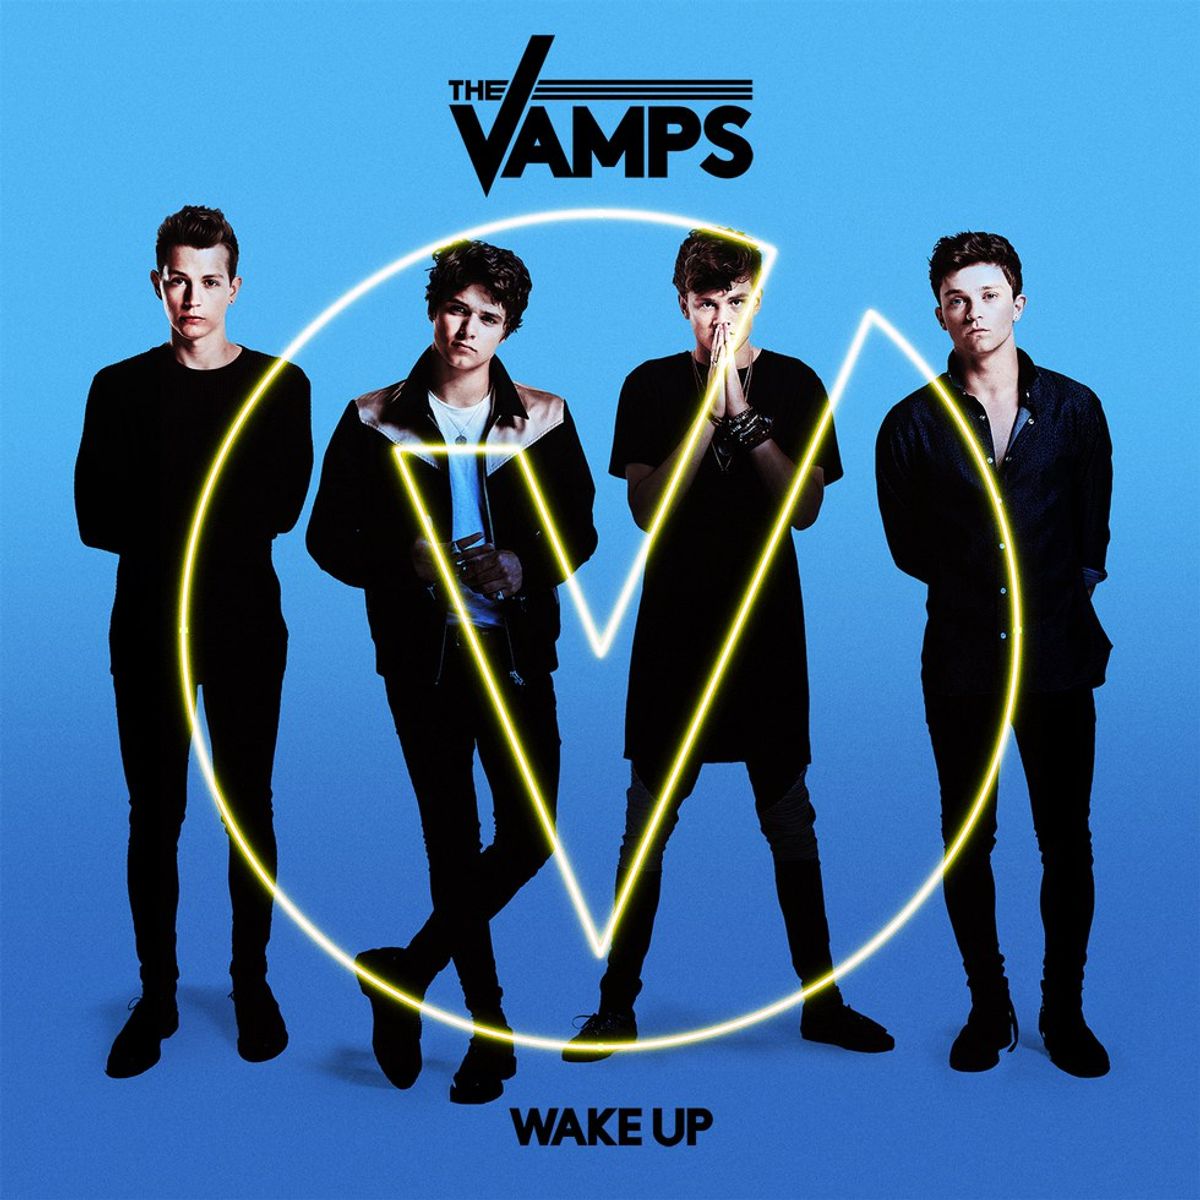 Why The Vamps Should Be Your New Music Obsession